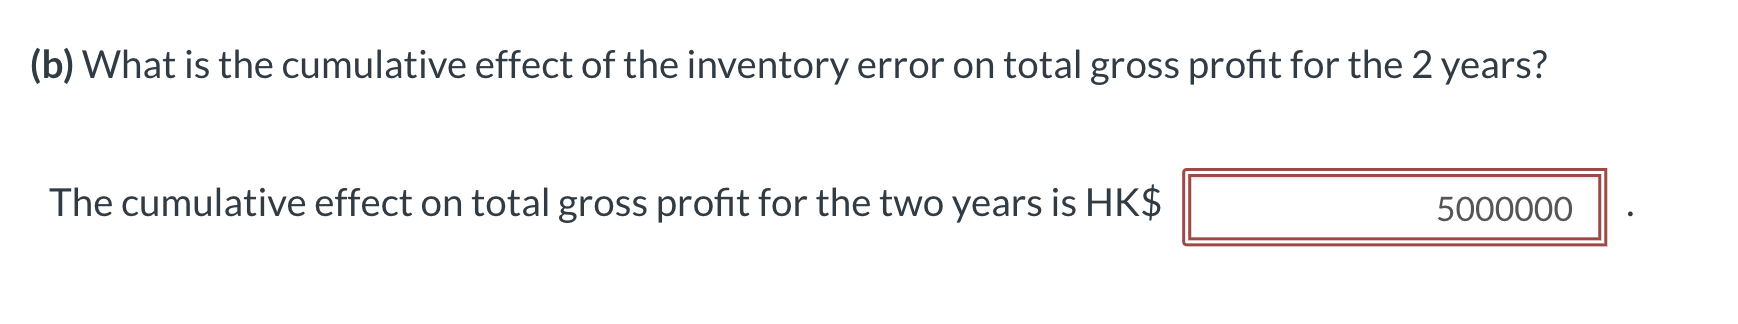 (b) What is the cumulative effect of the inventory error on total gross profit for the 2 years?The cumulative effect on tota